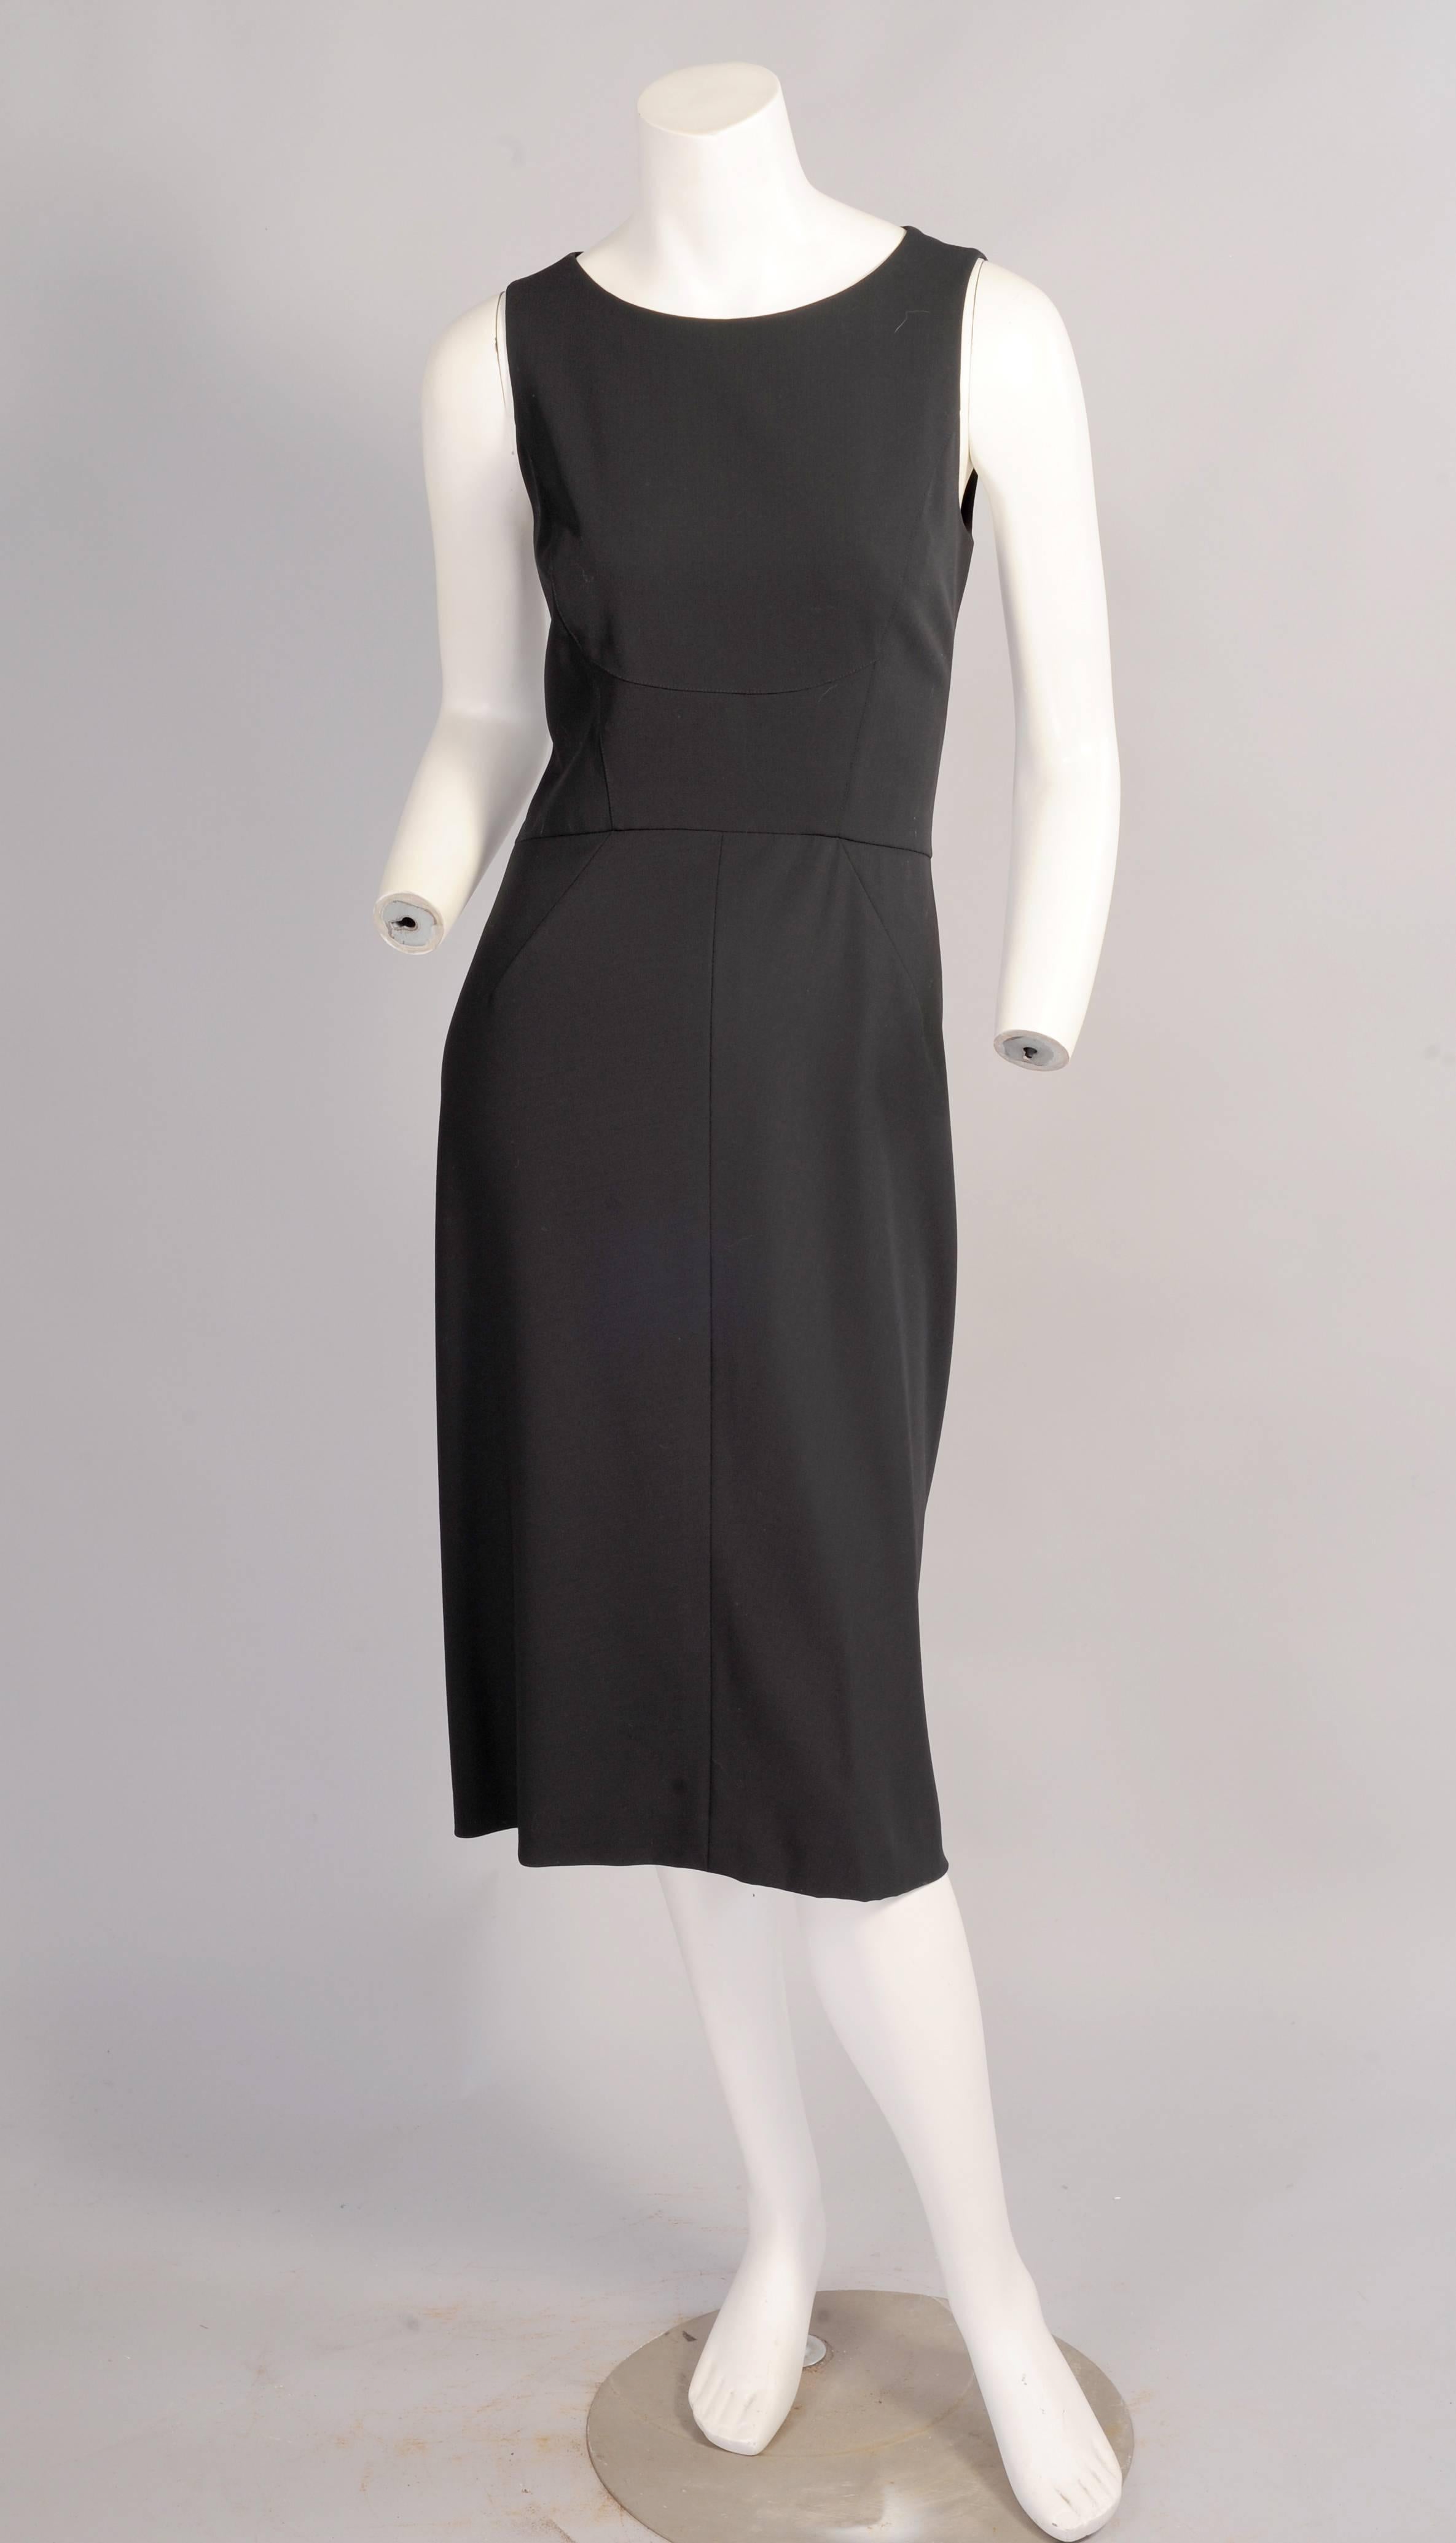 A fine light weight wool crepe is lined in black silk for this elegant dress from Chanel Boutique. Angled seams on the bodice and skirt add interest to the front. The skirt is pleated and stitched at the center back for an architectural look. This